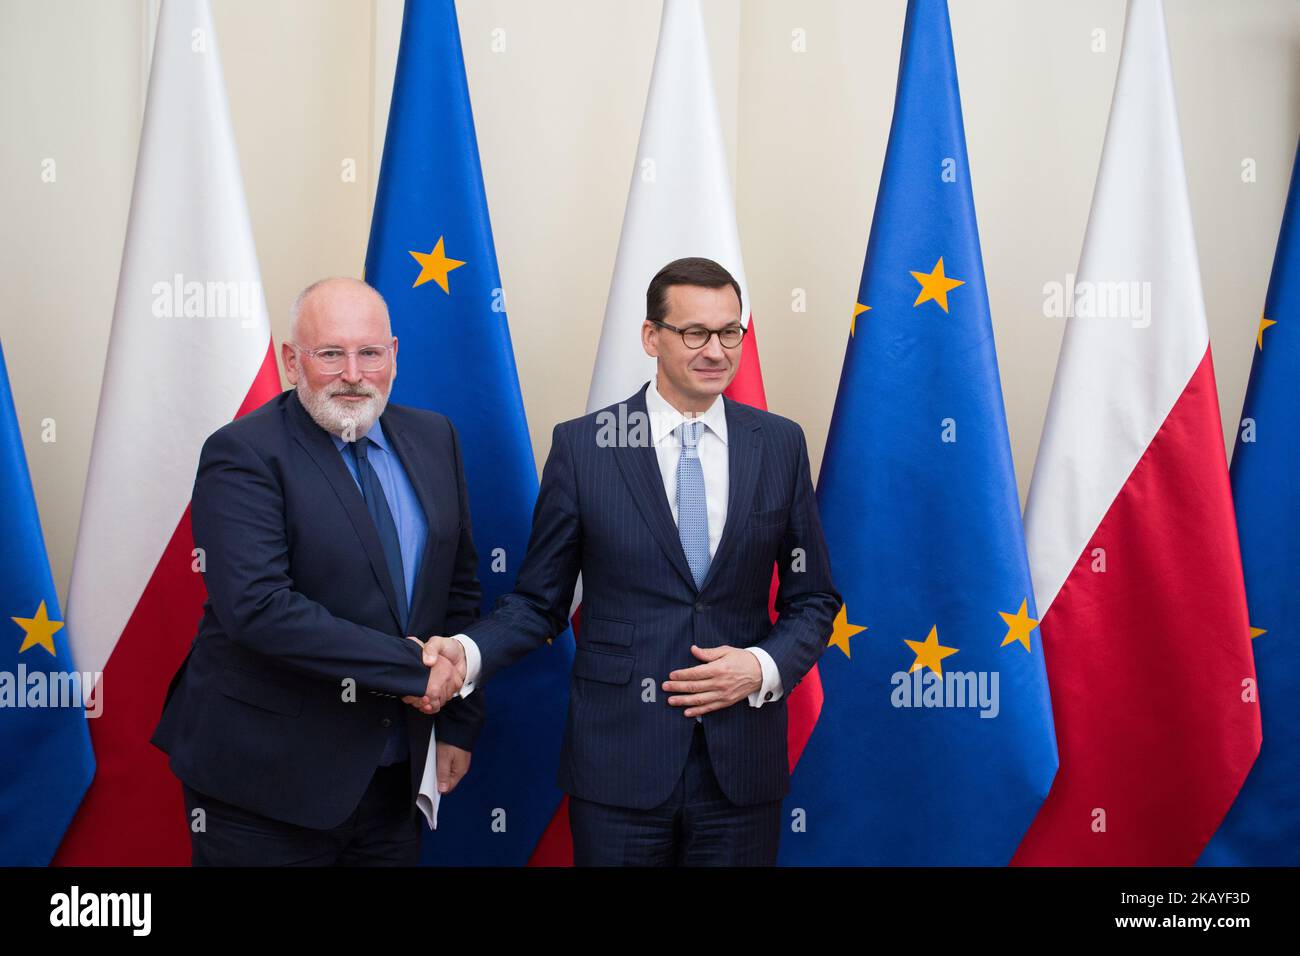 First Vice-President of European Commission Frans Timmermans (L) and Polish Prime Minister Mateusz Morawiecki (R) during a meeting at Chancellery of the Prime Minister in Warsaw, Poland on 18 June 2018. PM Morawiecki and Timmermans will discuss the rule of law in Poland (Photo by Mateusz Wlodarczyk/NurPhoto) Stock Photo